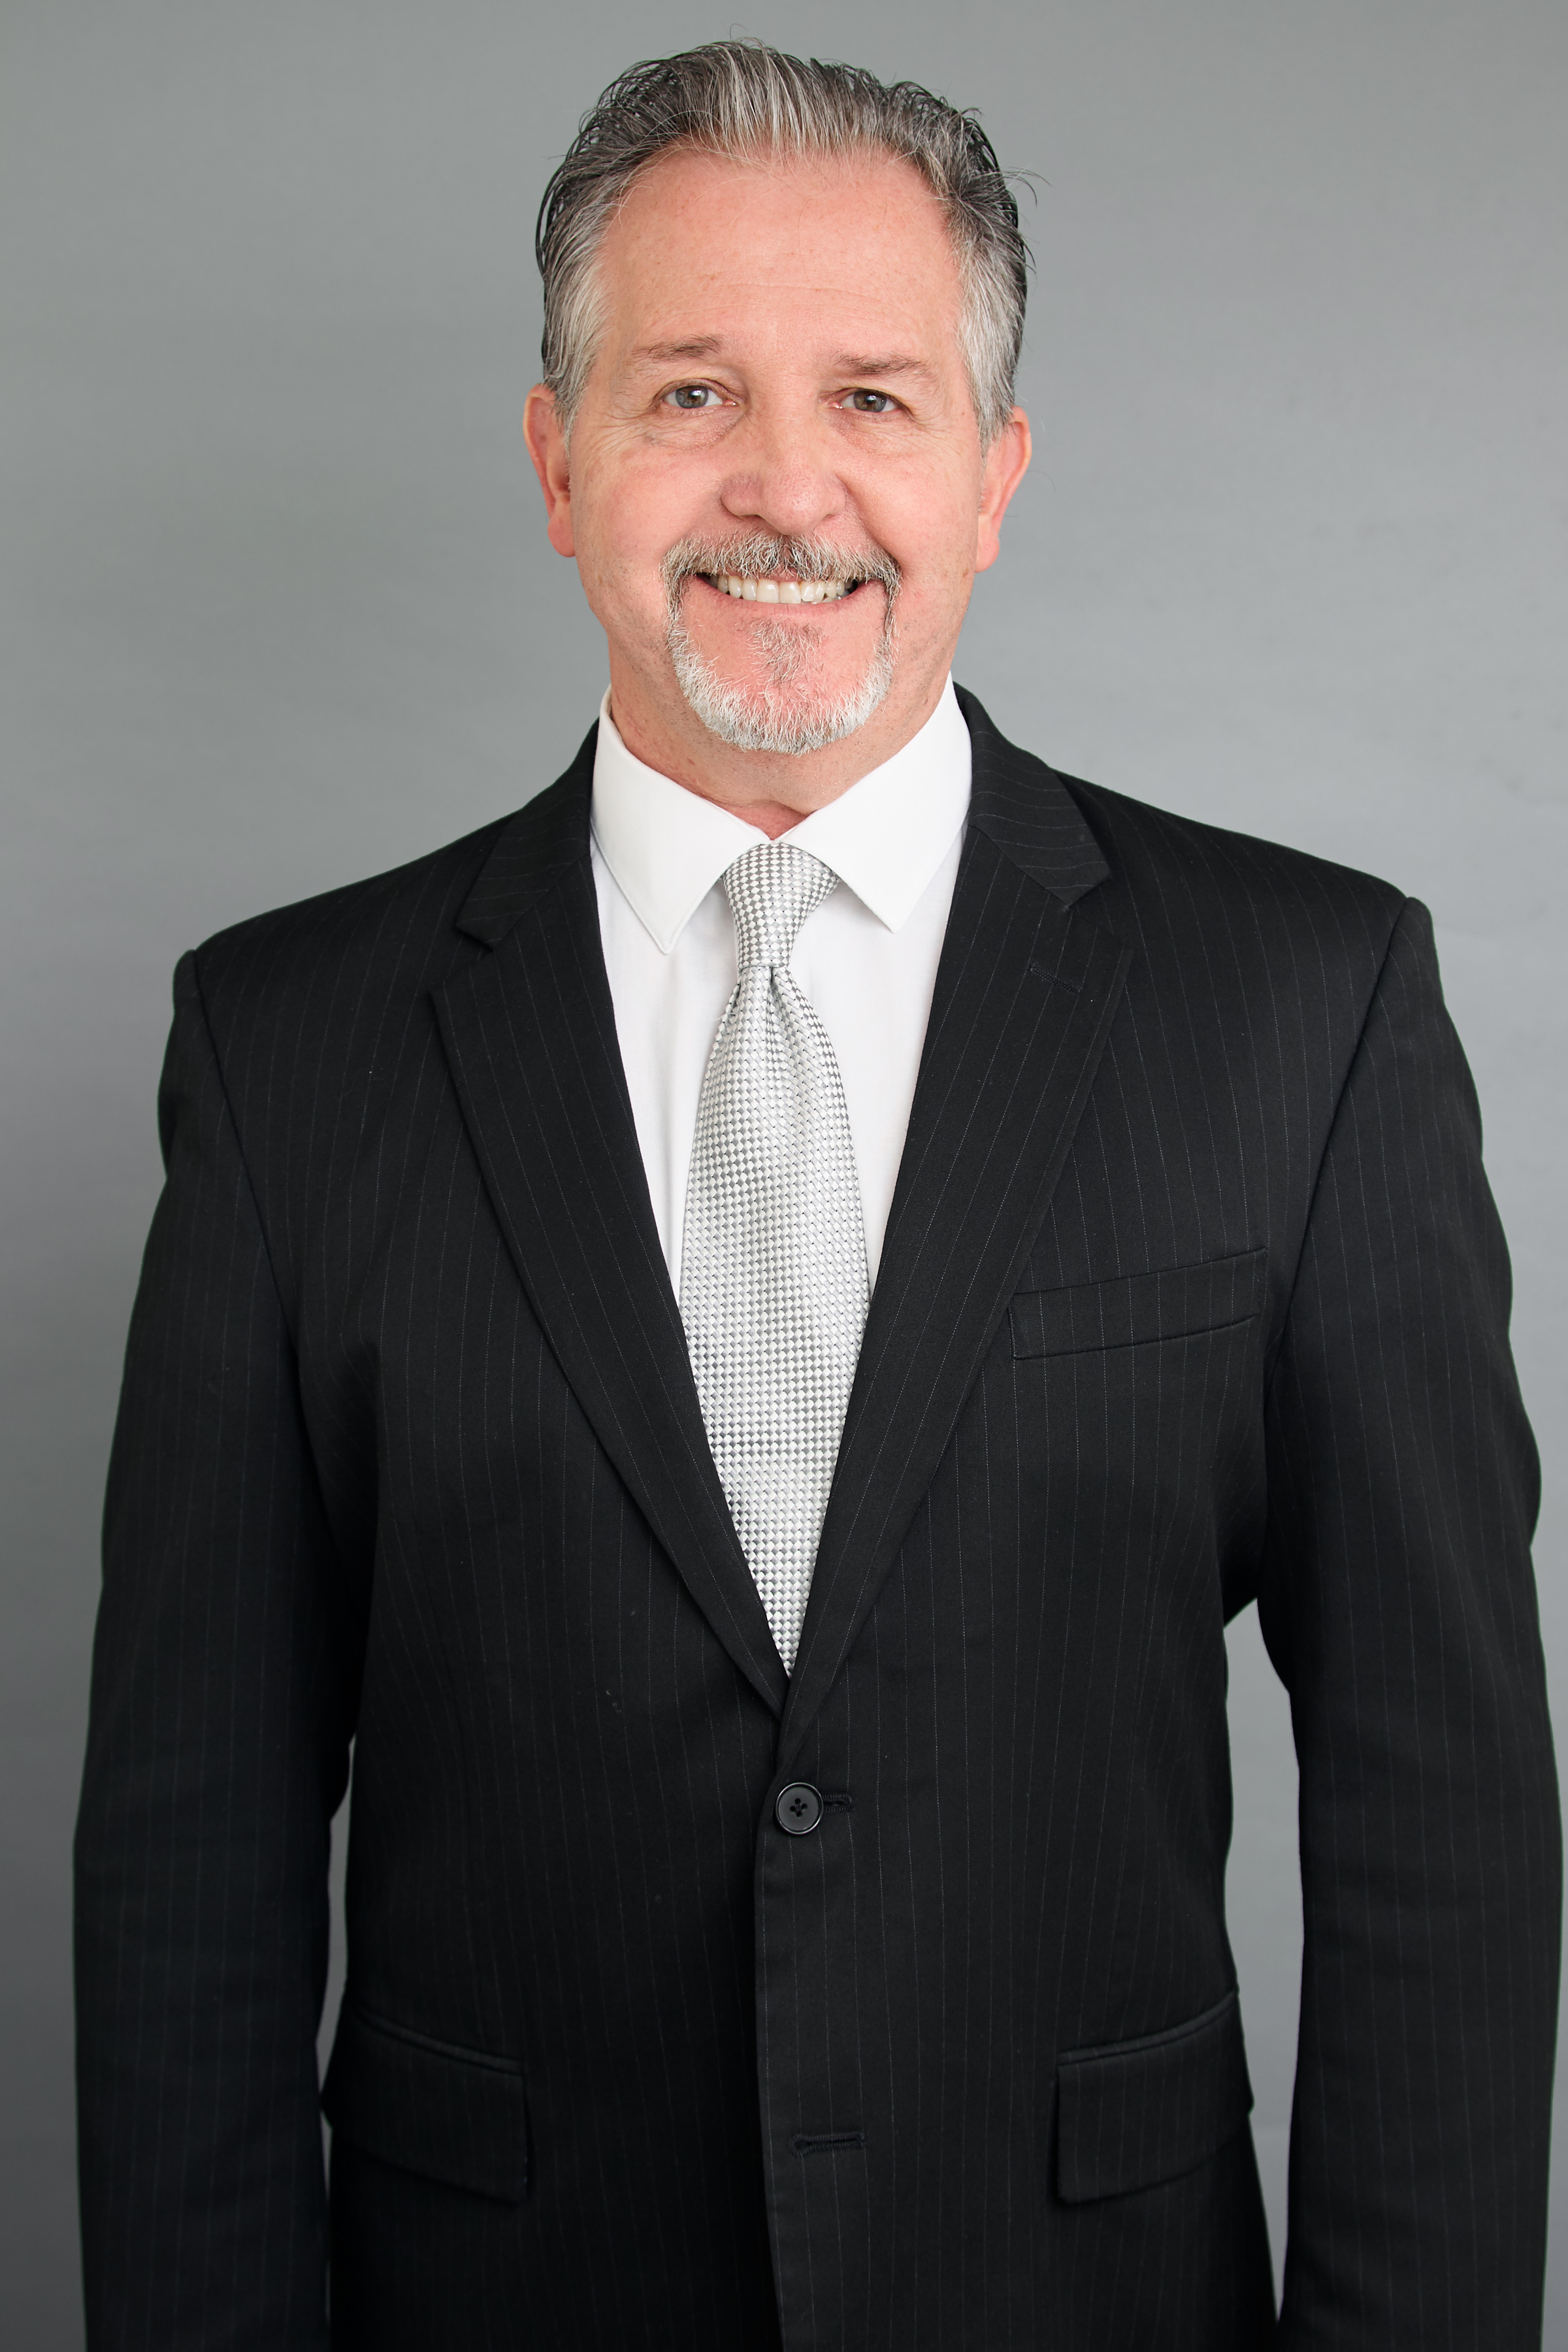 Paul A. Lucido is chief marketing officer for PRMG, Paramount Residential Mortgage Group Inc.